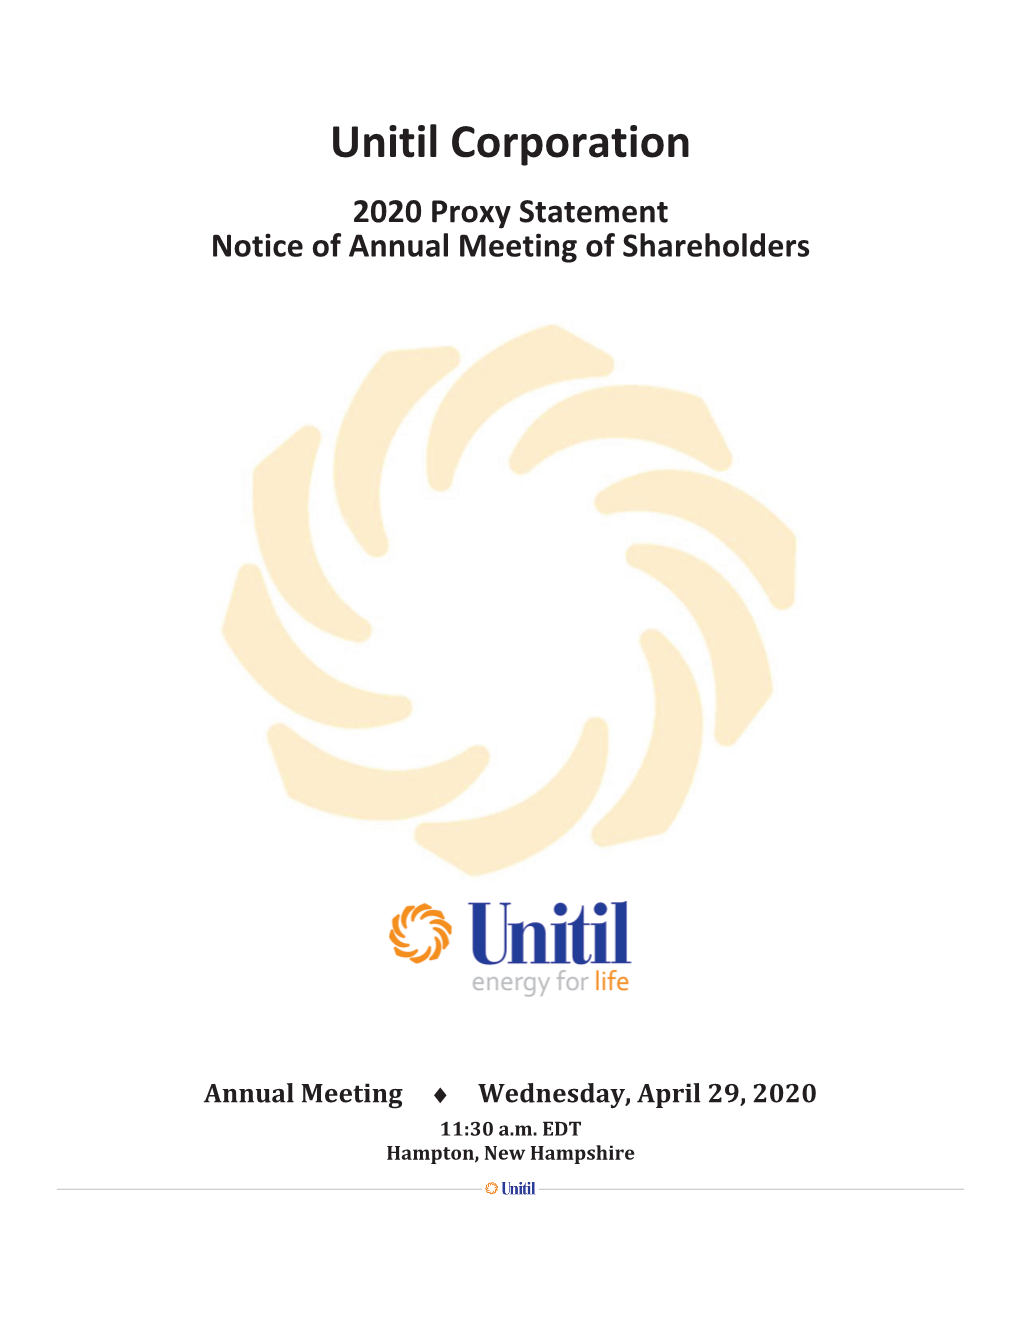 Unitil Corporation 2020 Proxy Statement Notice of Annual Meeting of Shareholders